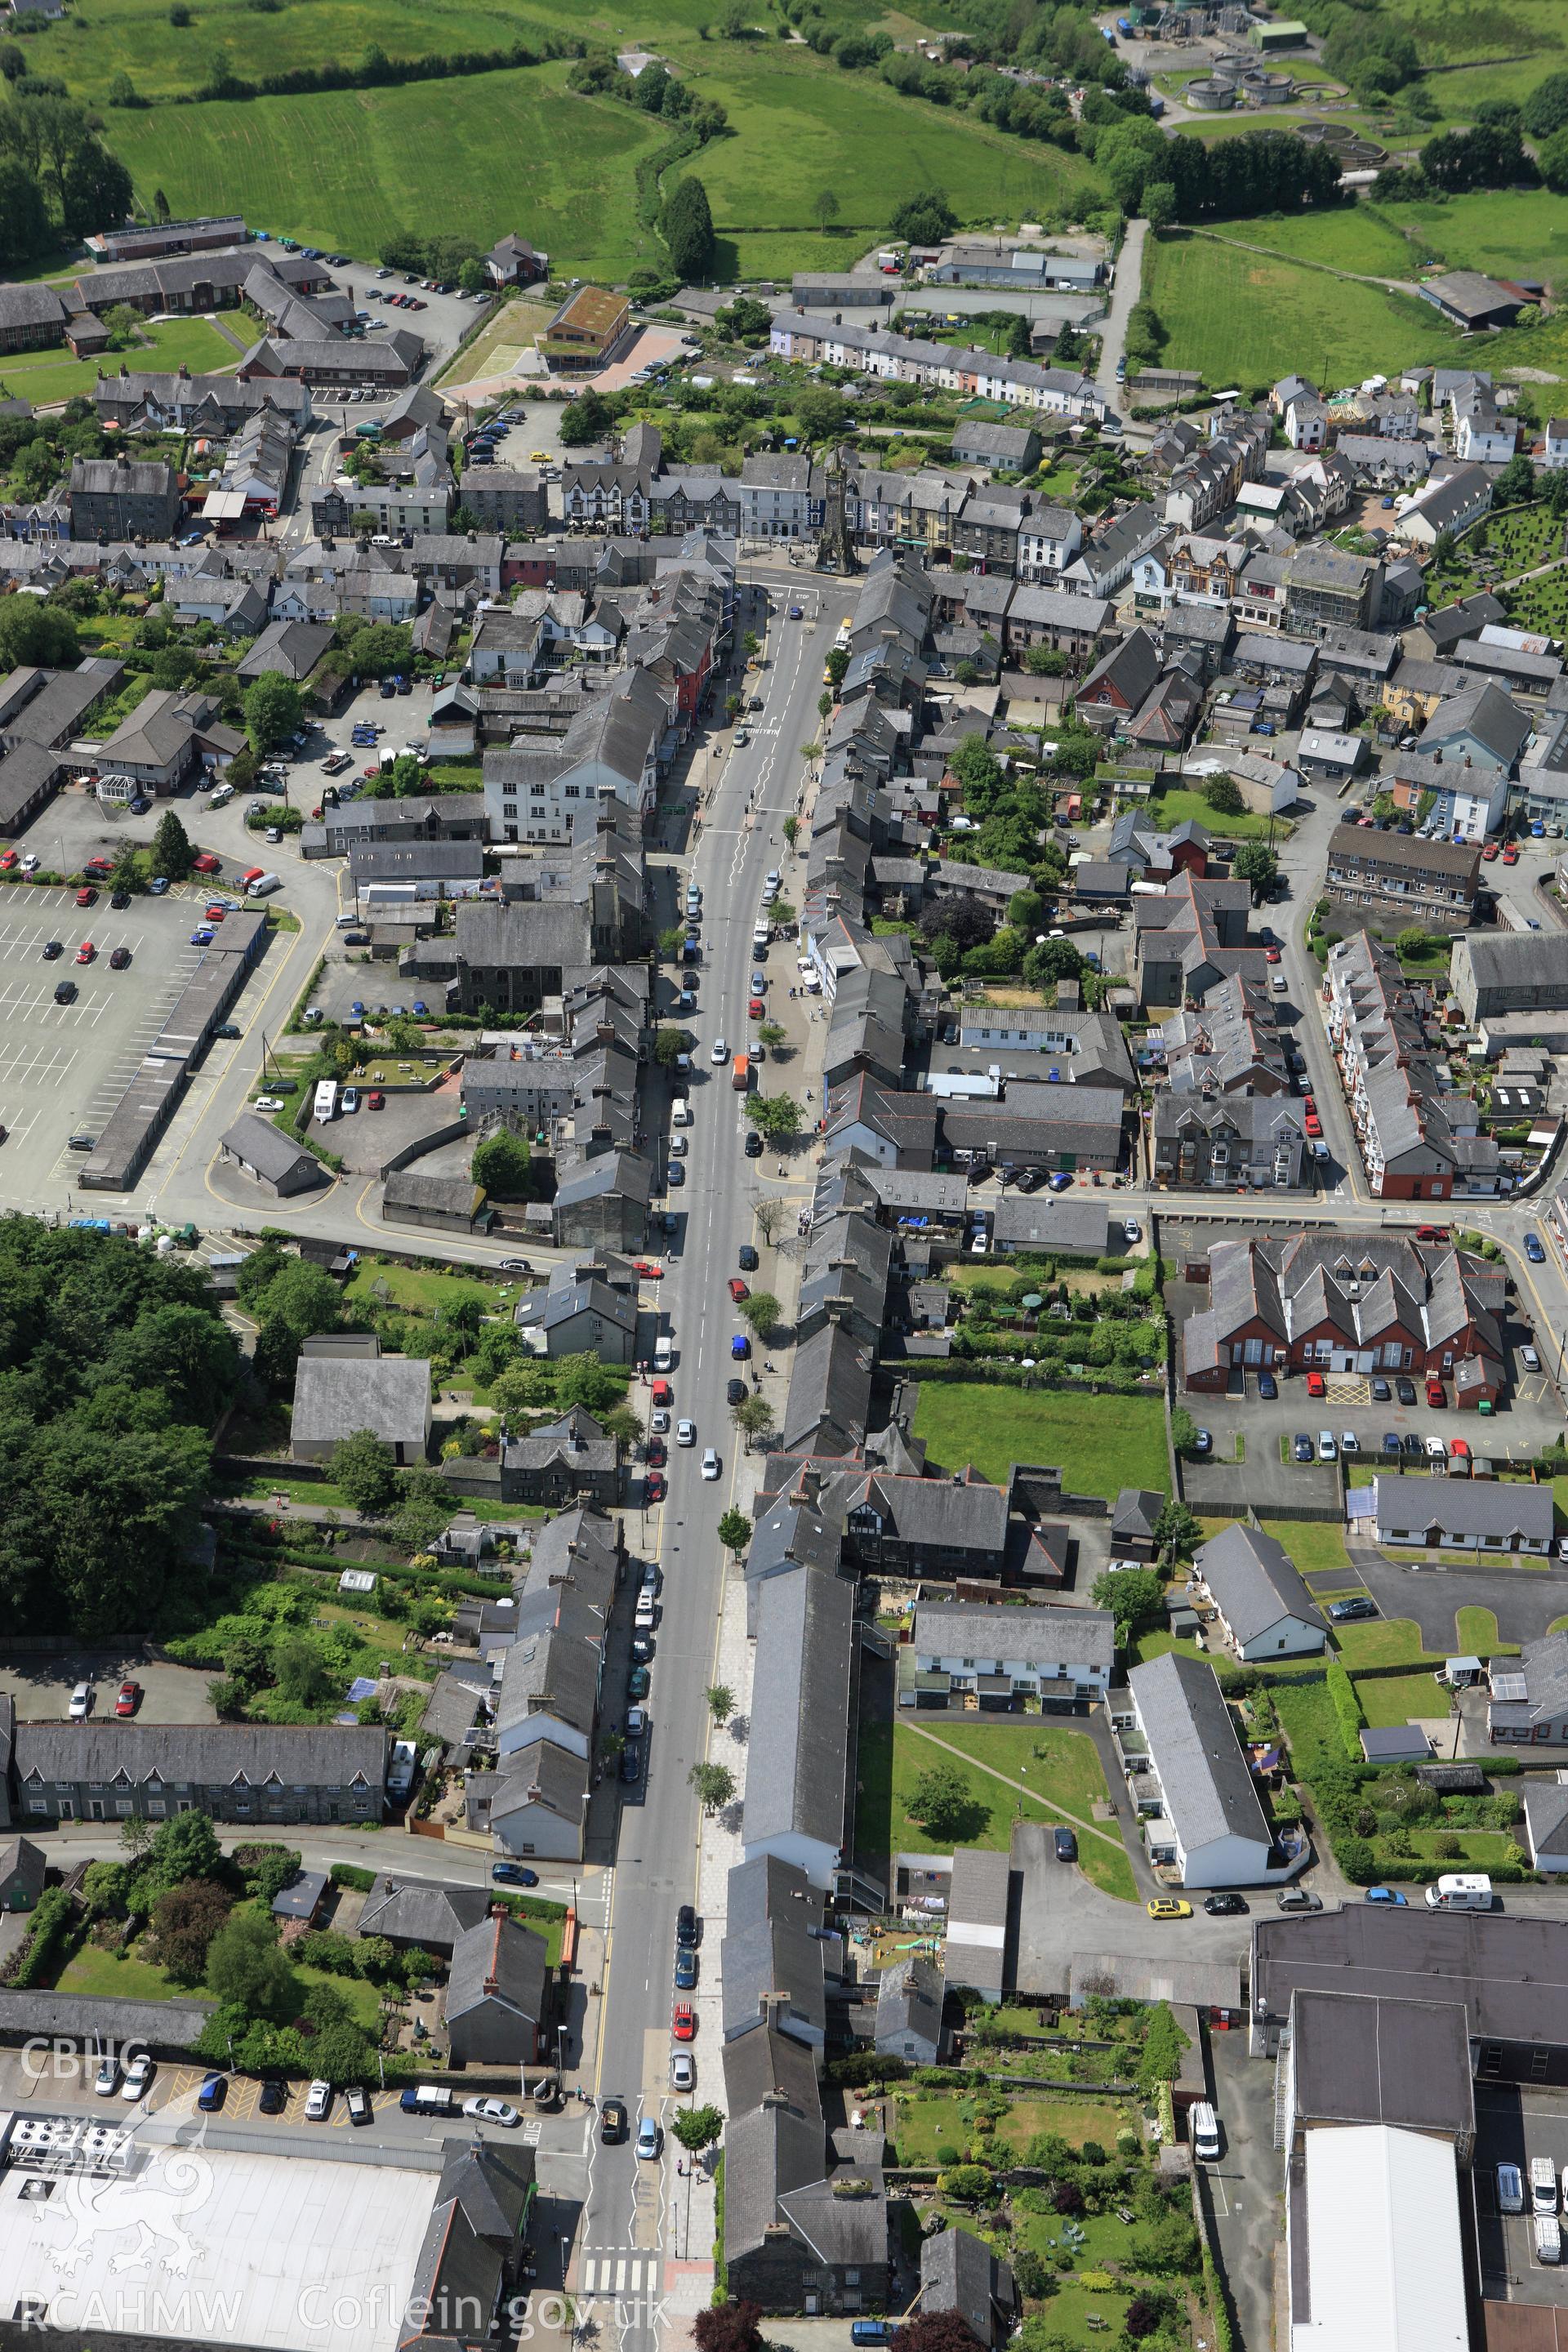 RCAHMW colour oblique aerial photograph of Machynlleth town. Taken on 02 June 2009 by Toby Driver